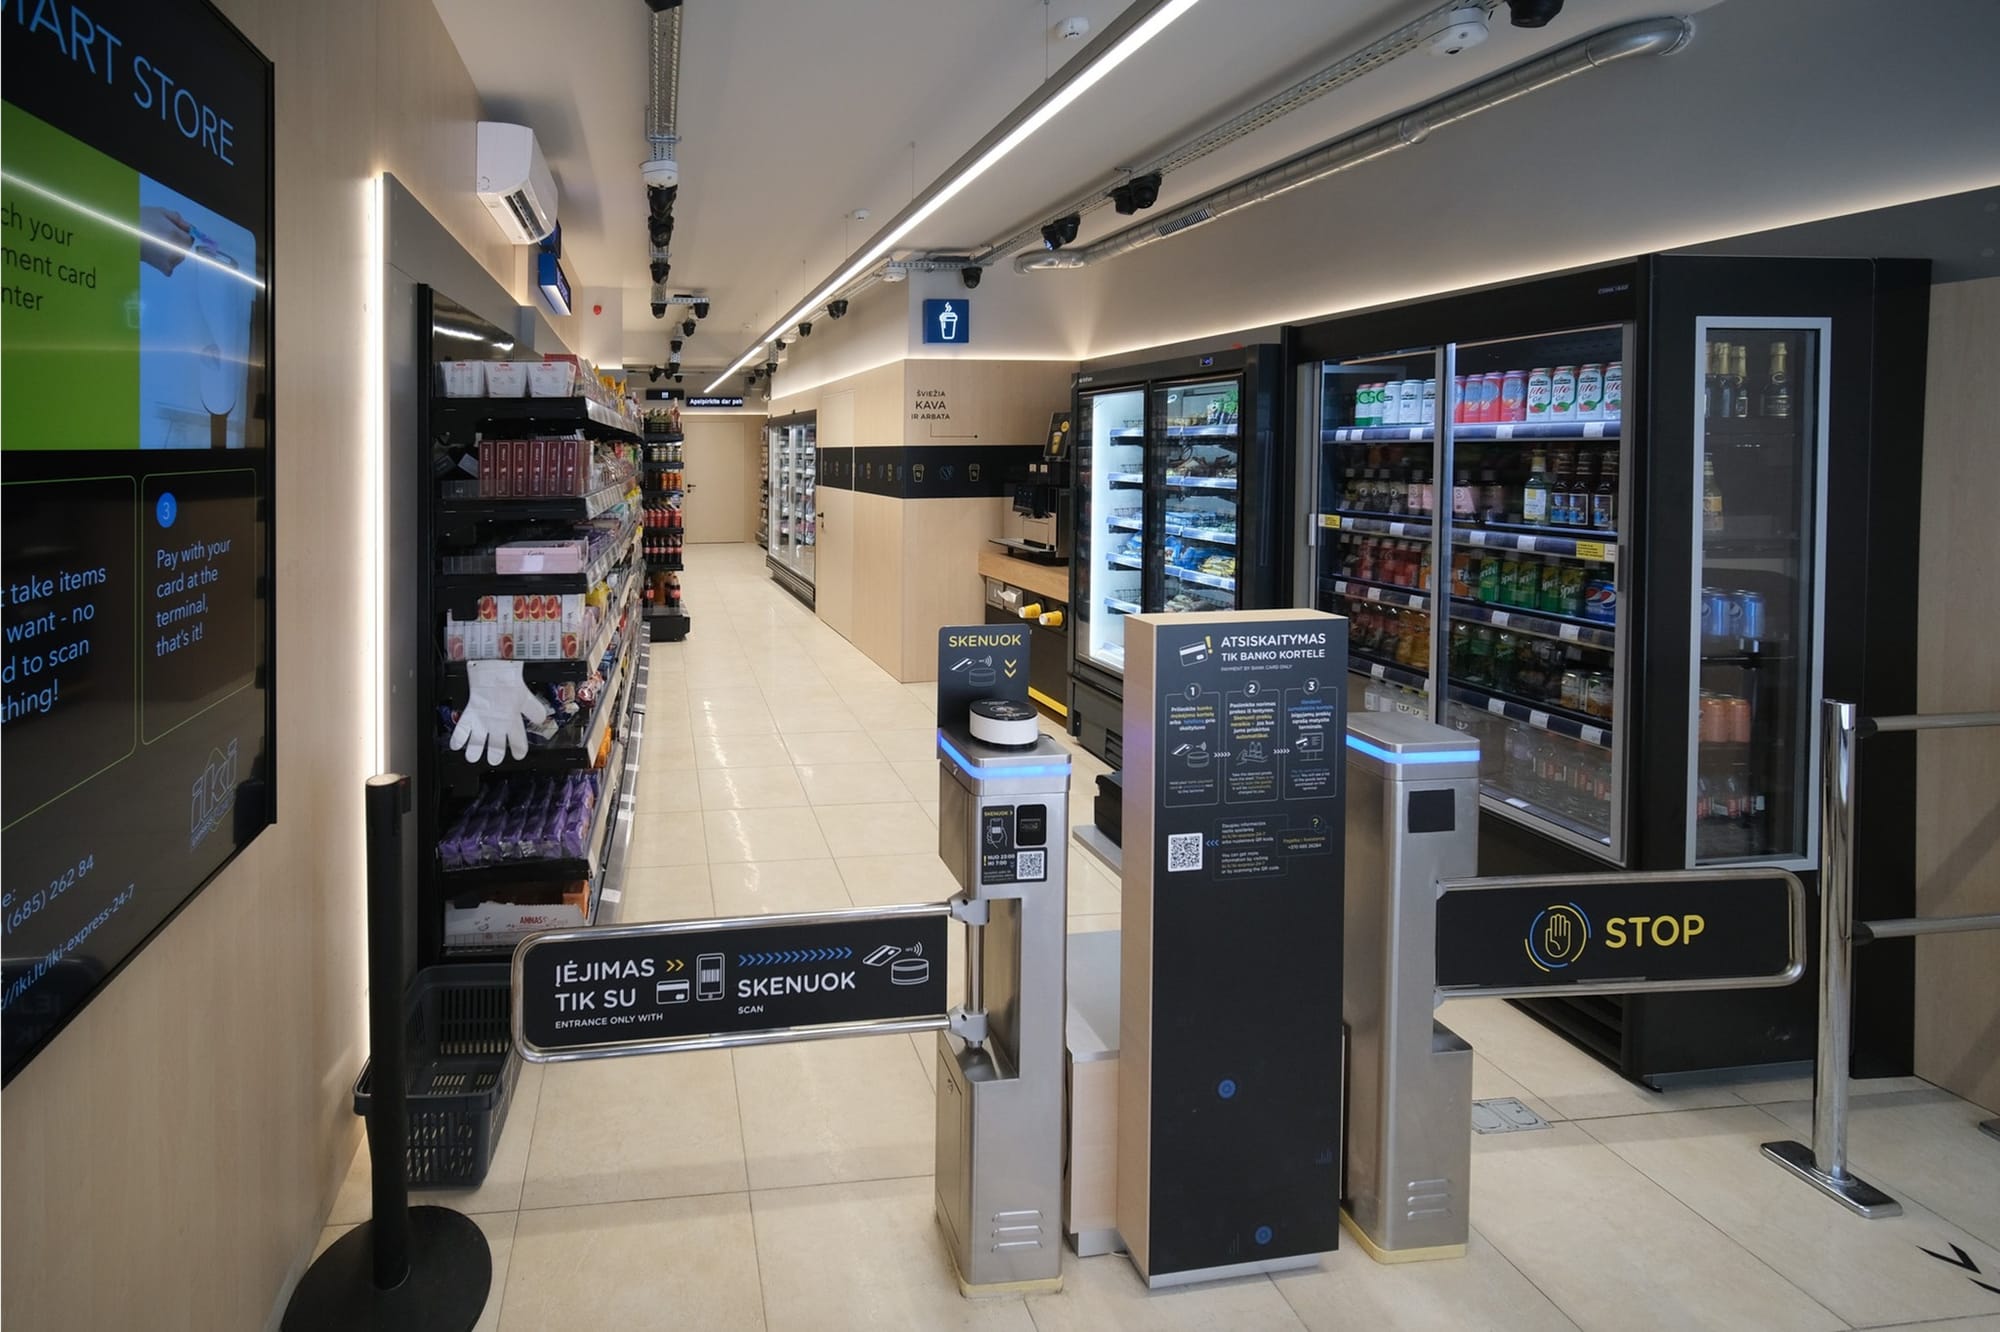 Pixevia secured €1.5M to expand the presence of its smart stores